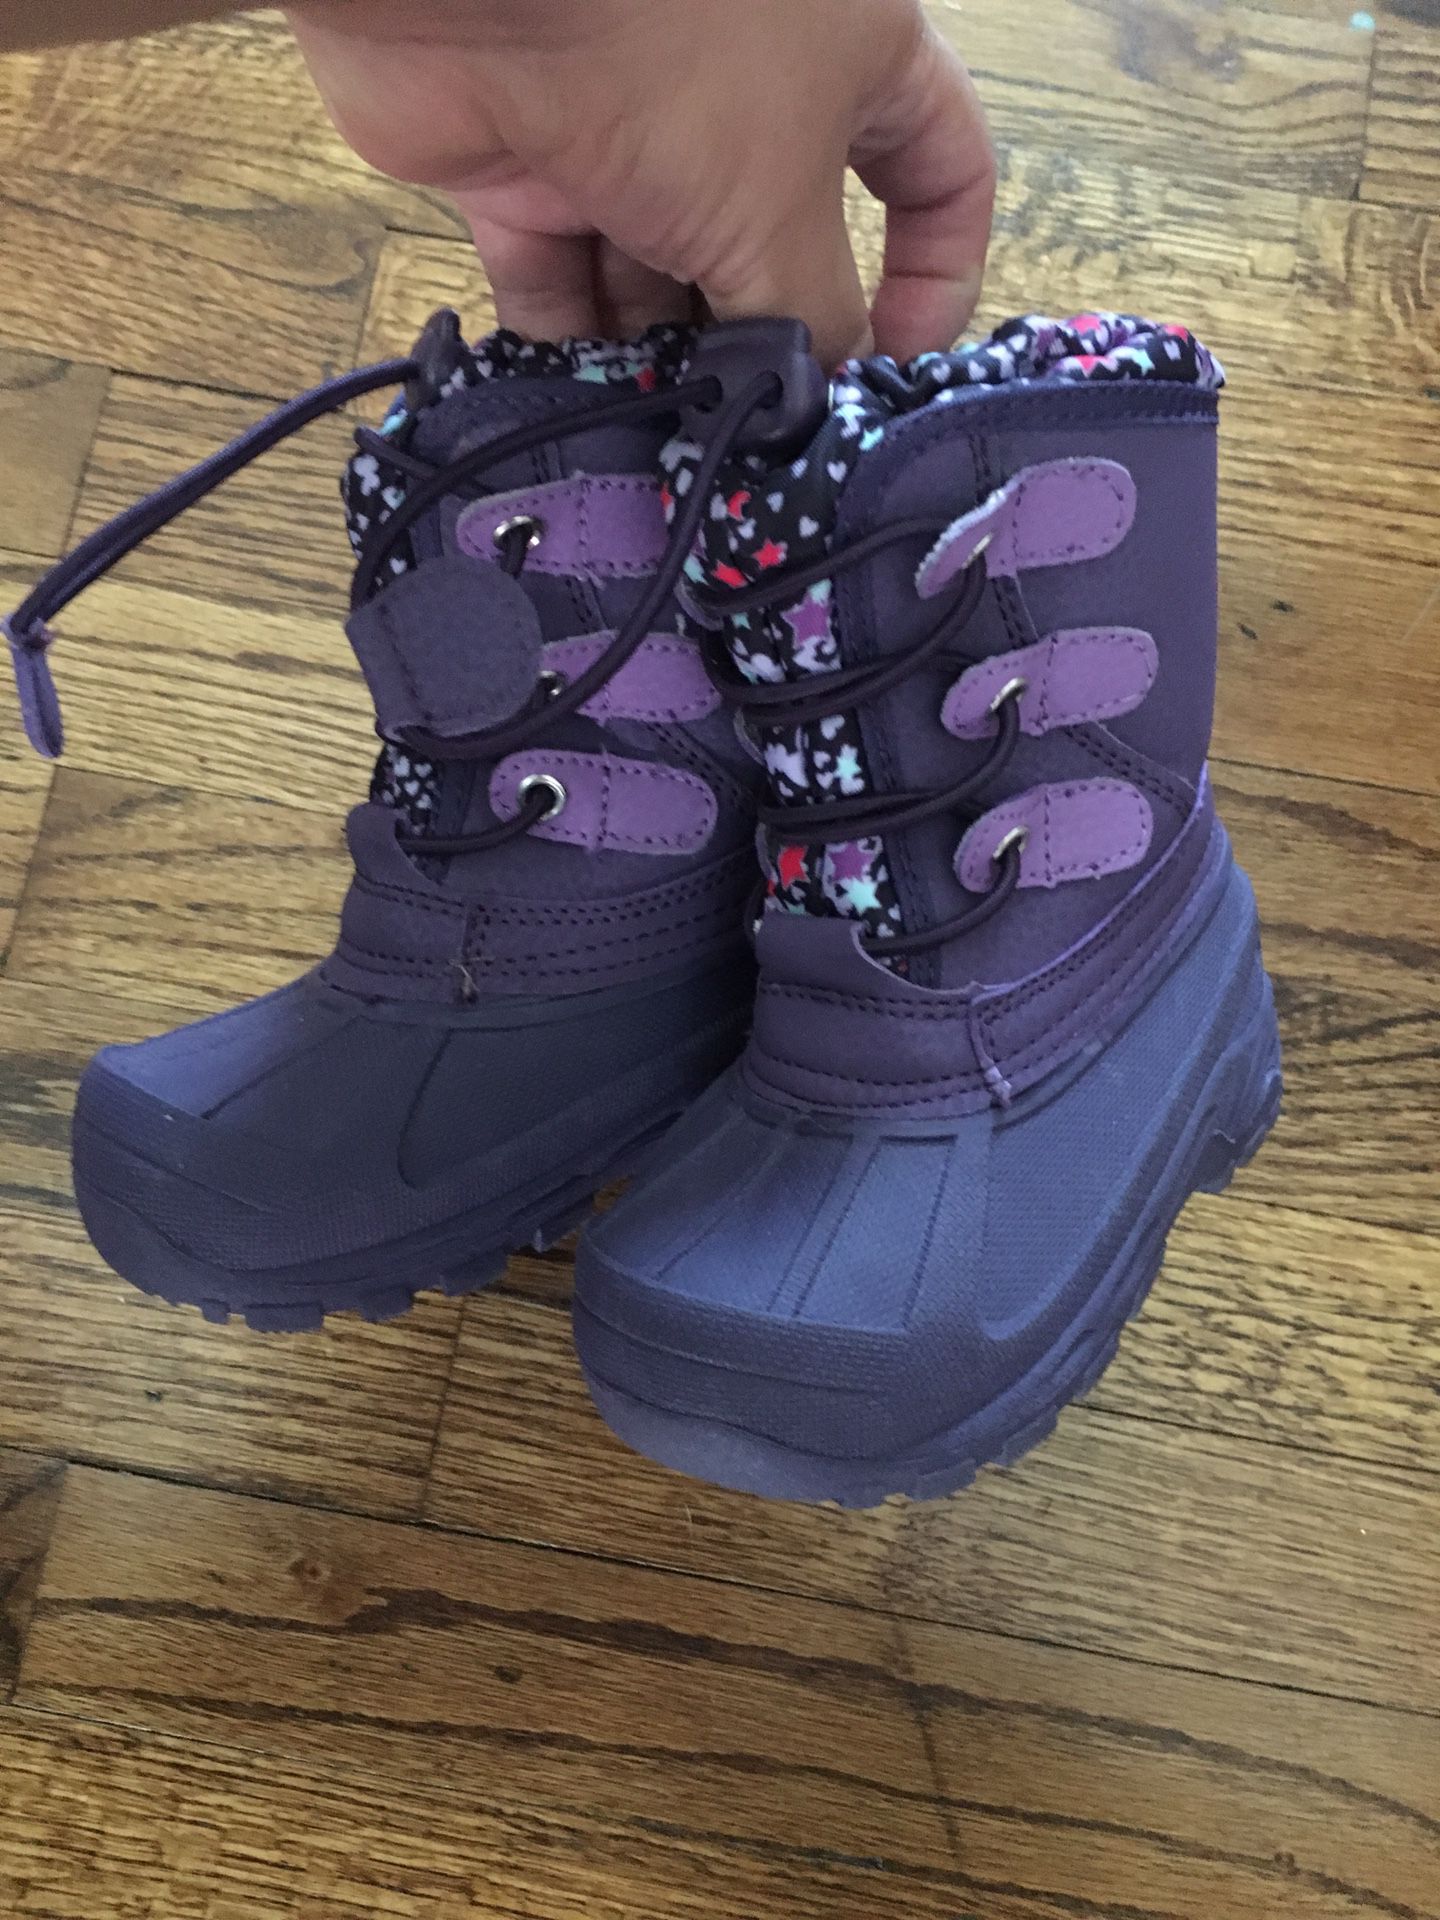 Toddler girls snow boots size 5/6